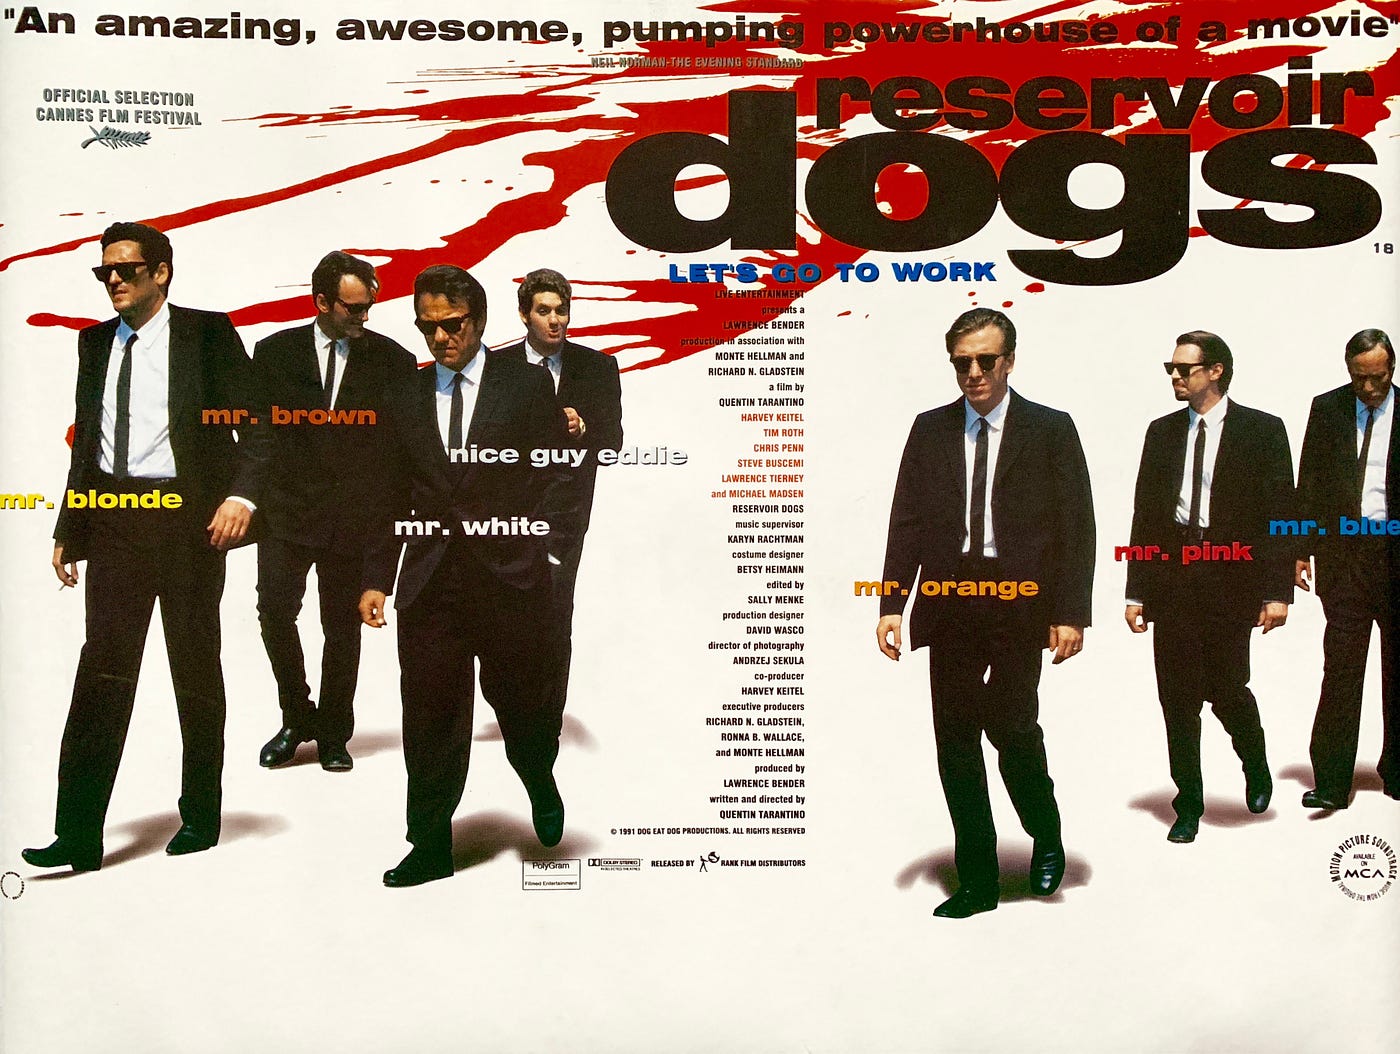 Again, SPOILERS for Reservoir Dogs . . .